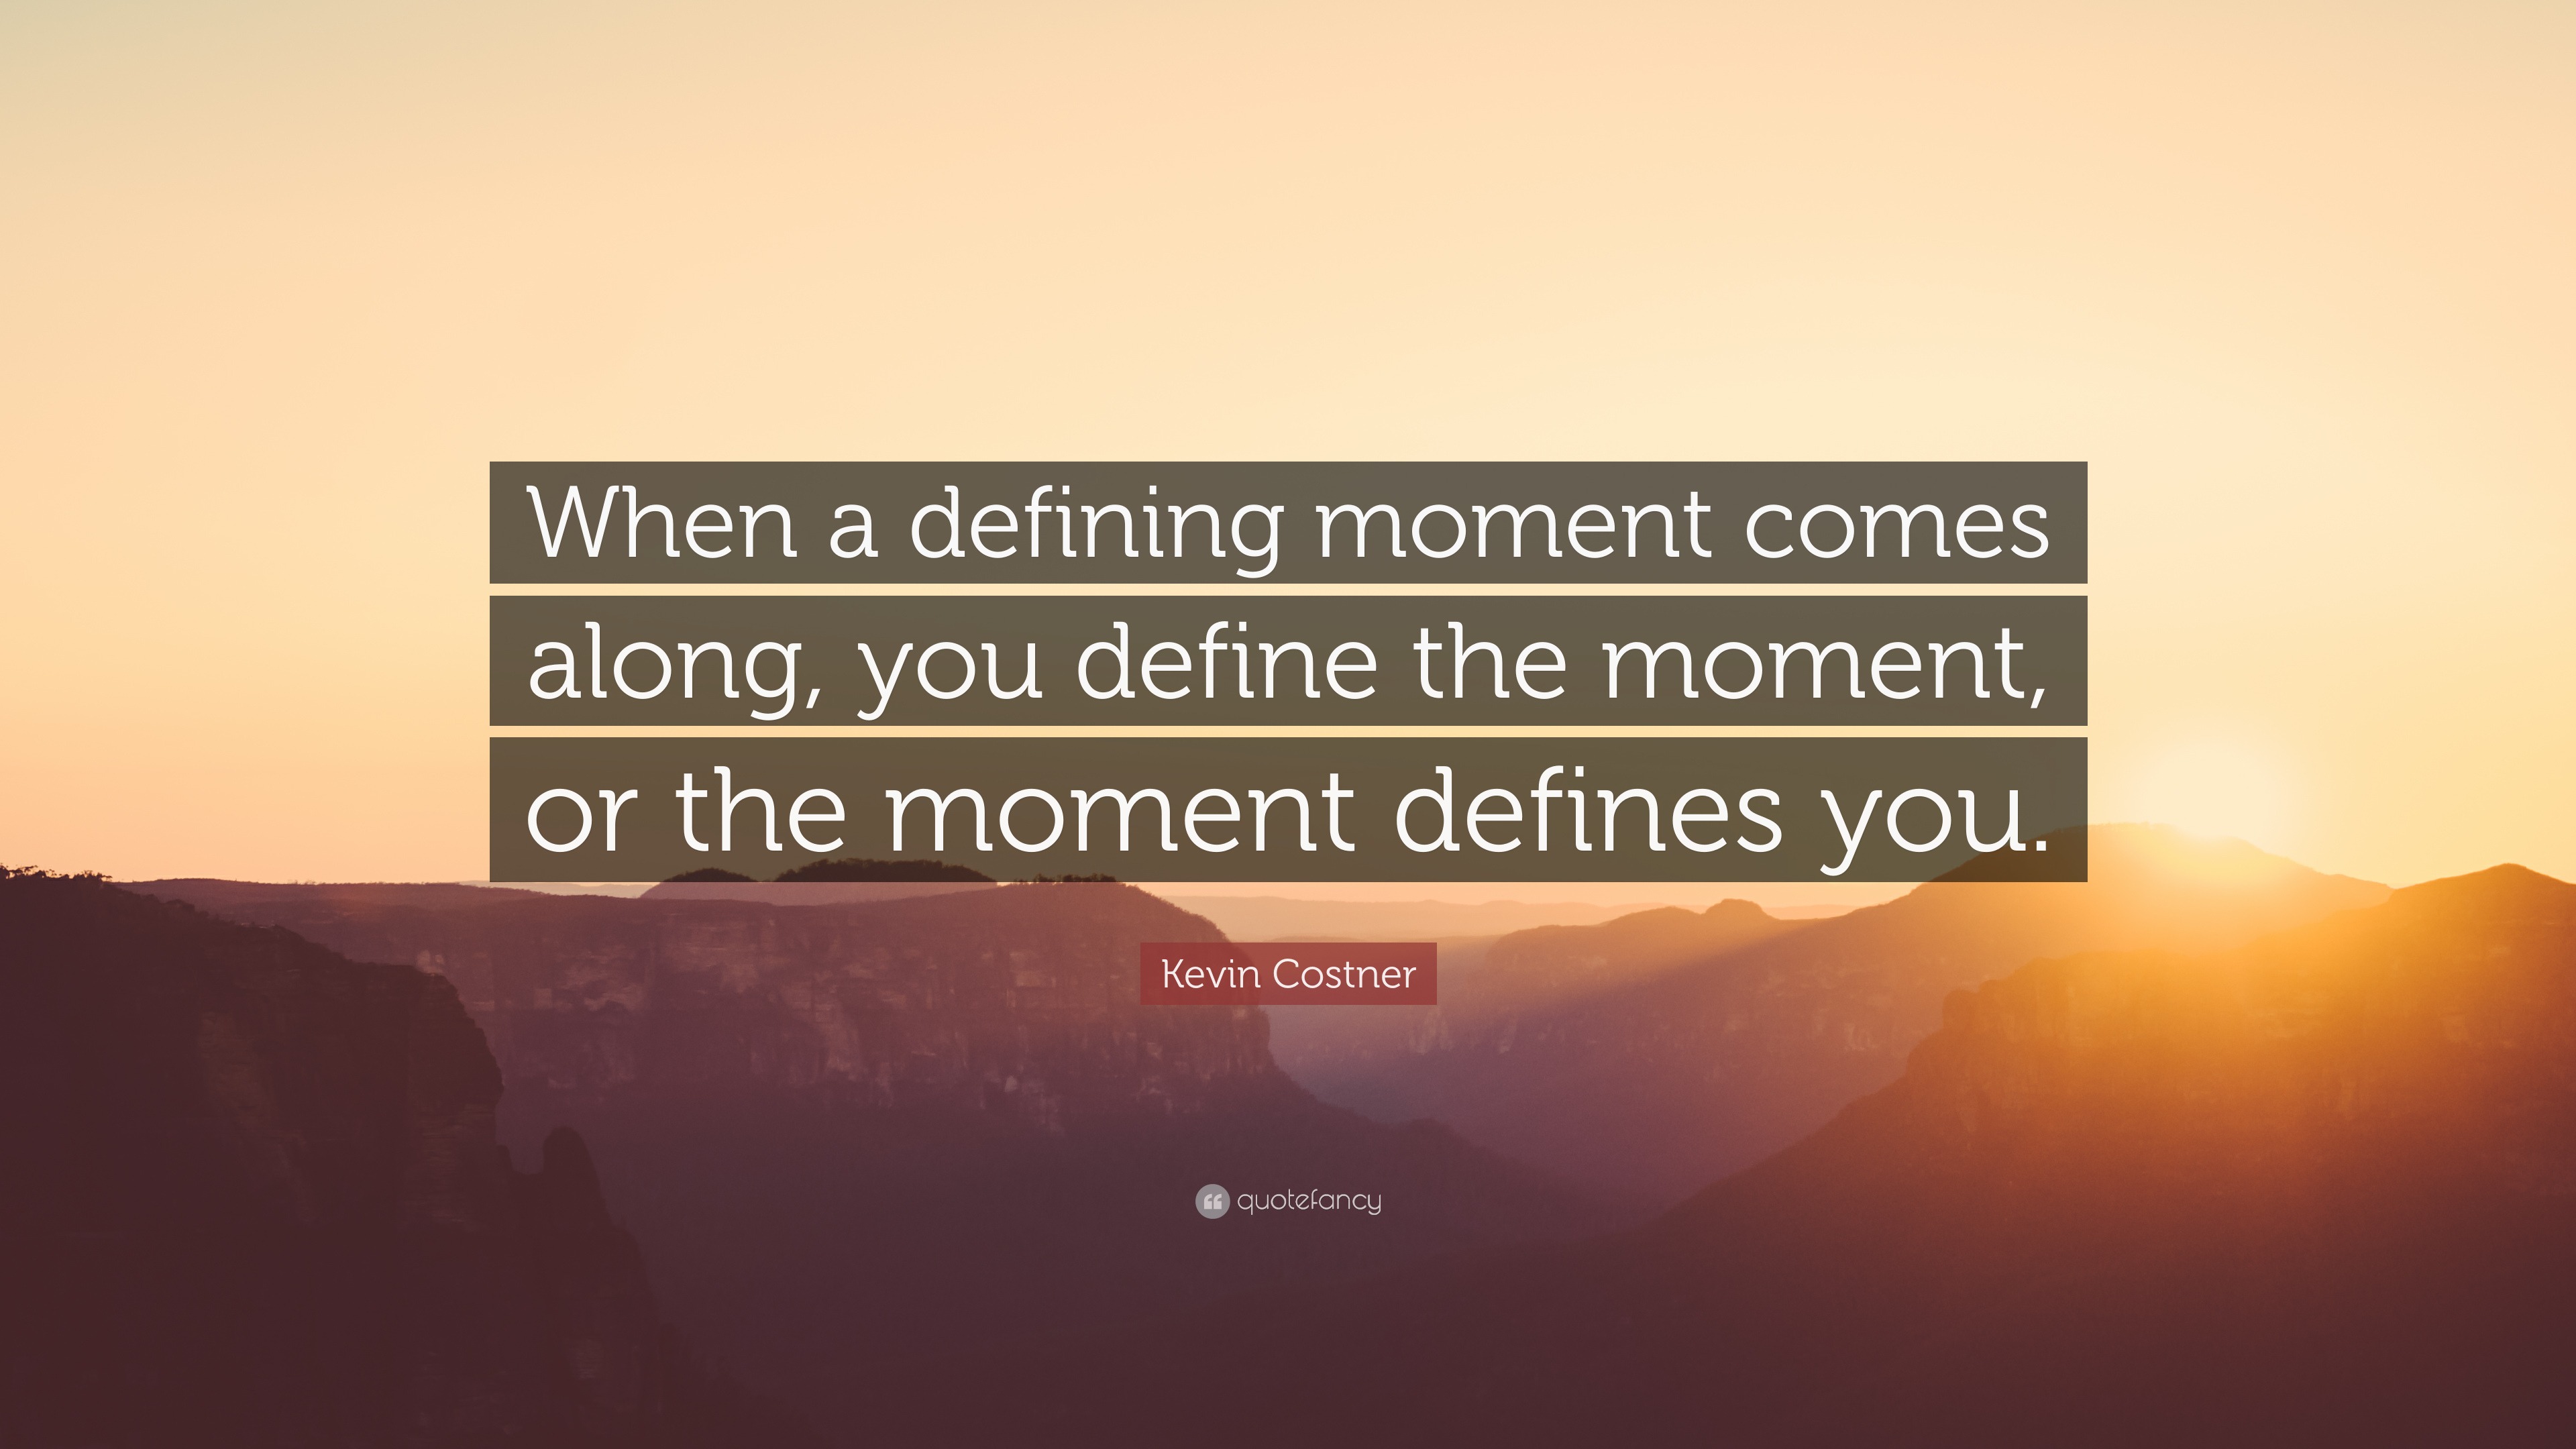 Kevin Costner Quote: "When a defining moment comes along, you define the moment, or the moment ...